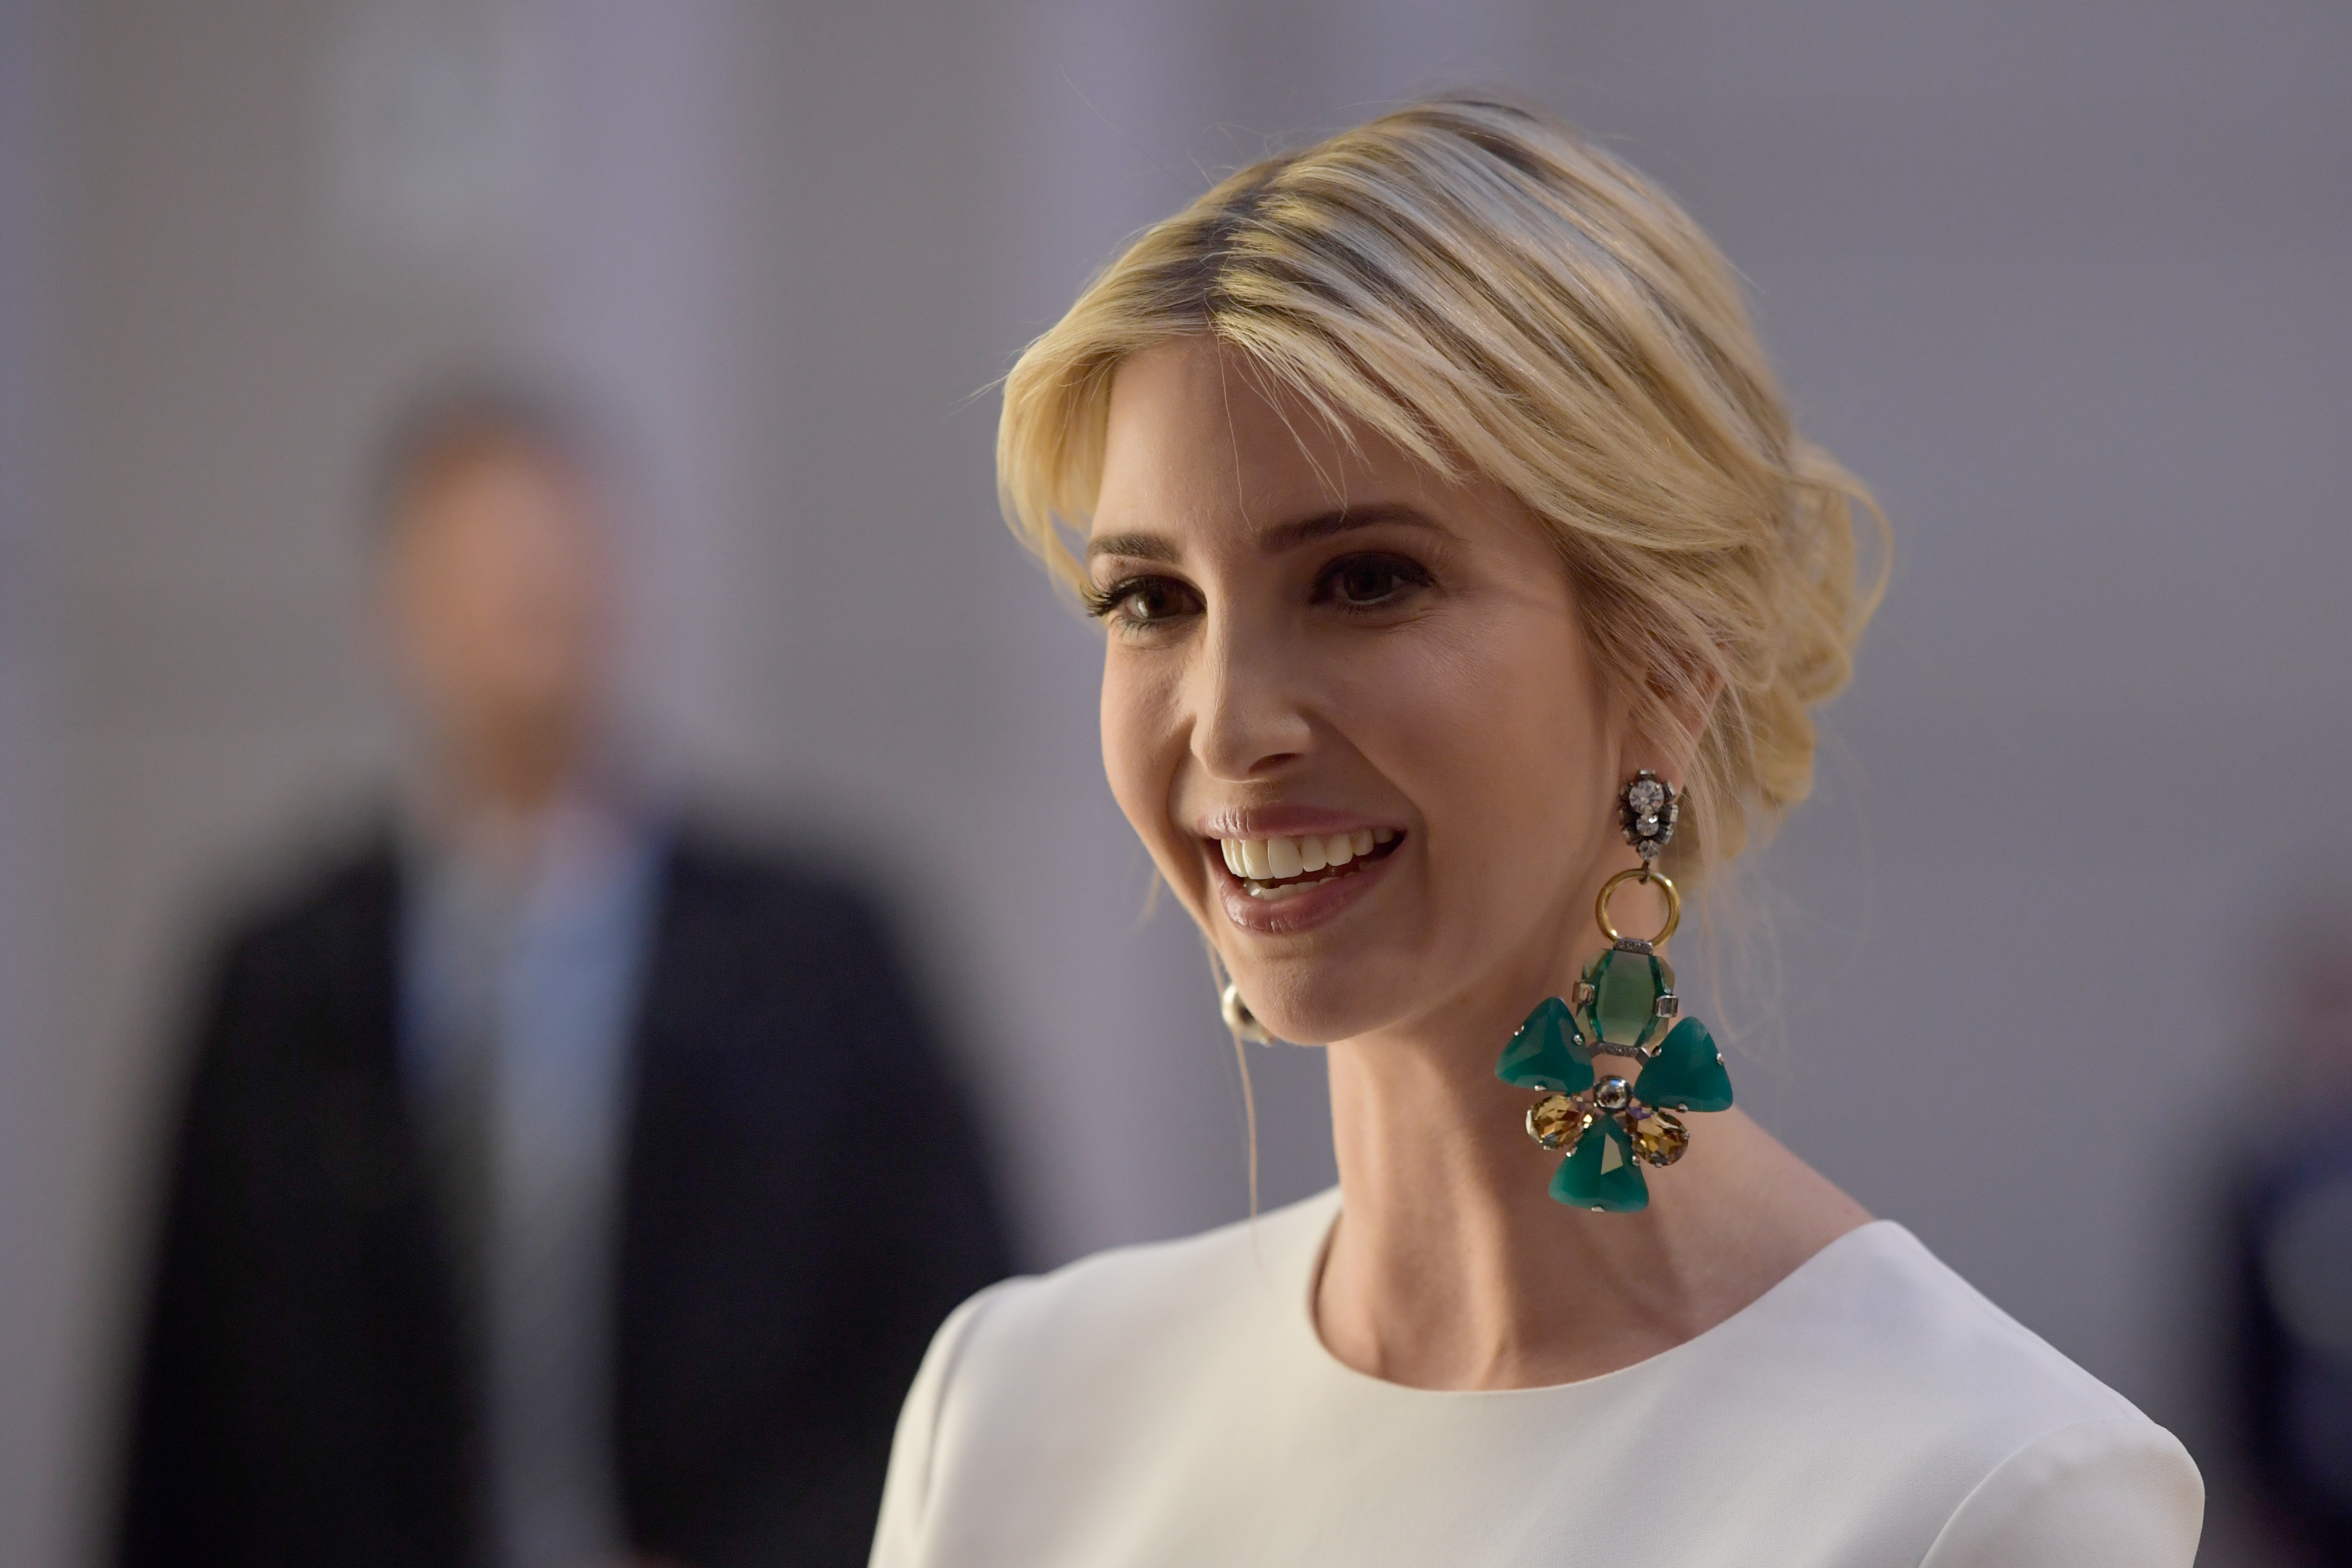 Ivanka Trump, daughter of U.S. President Donald Trump, arrives at a Gala Dinner at Deutsche Bank within the framework of the W20 summit  on April 25, 2017 in Berlin, Germany. (Pool—Getty Images)